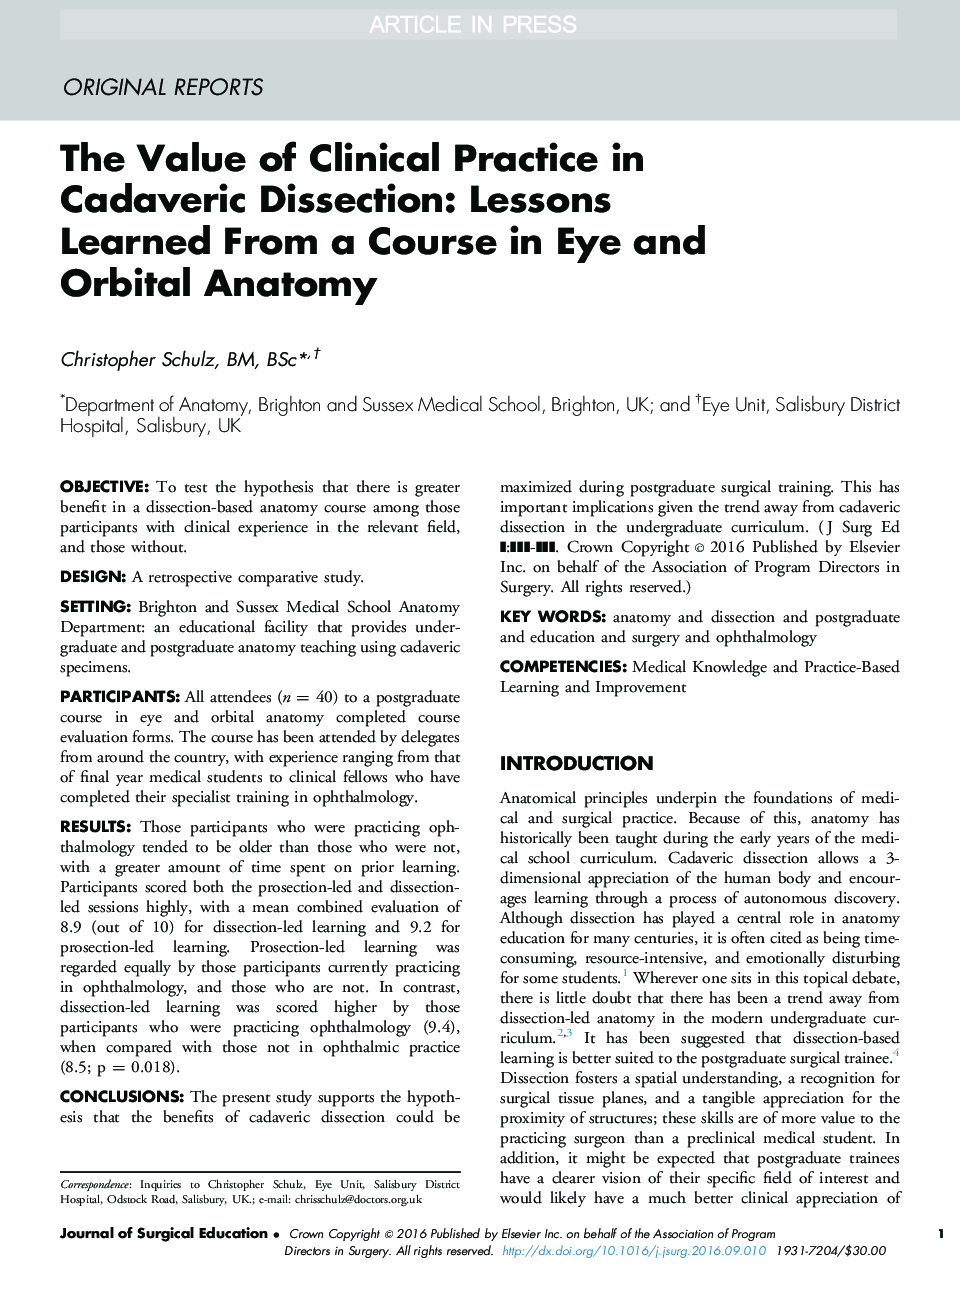 The Value of Clinical Practice in Cadaveric Dissection: Lessons Learned From a Course in Eye and Orbital Anatomy